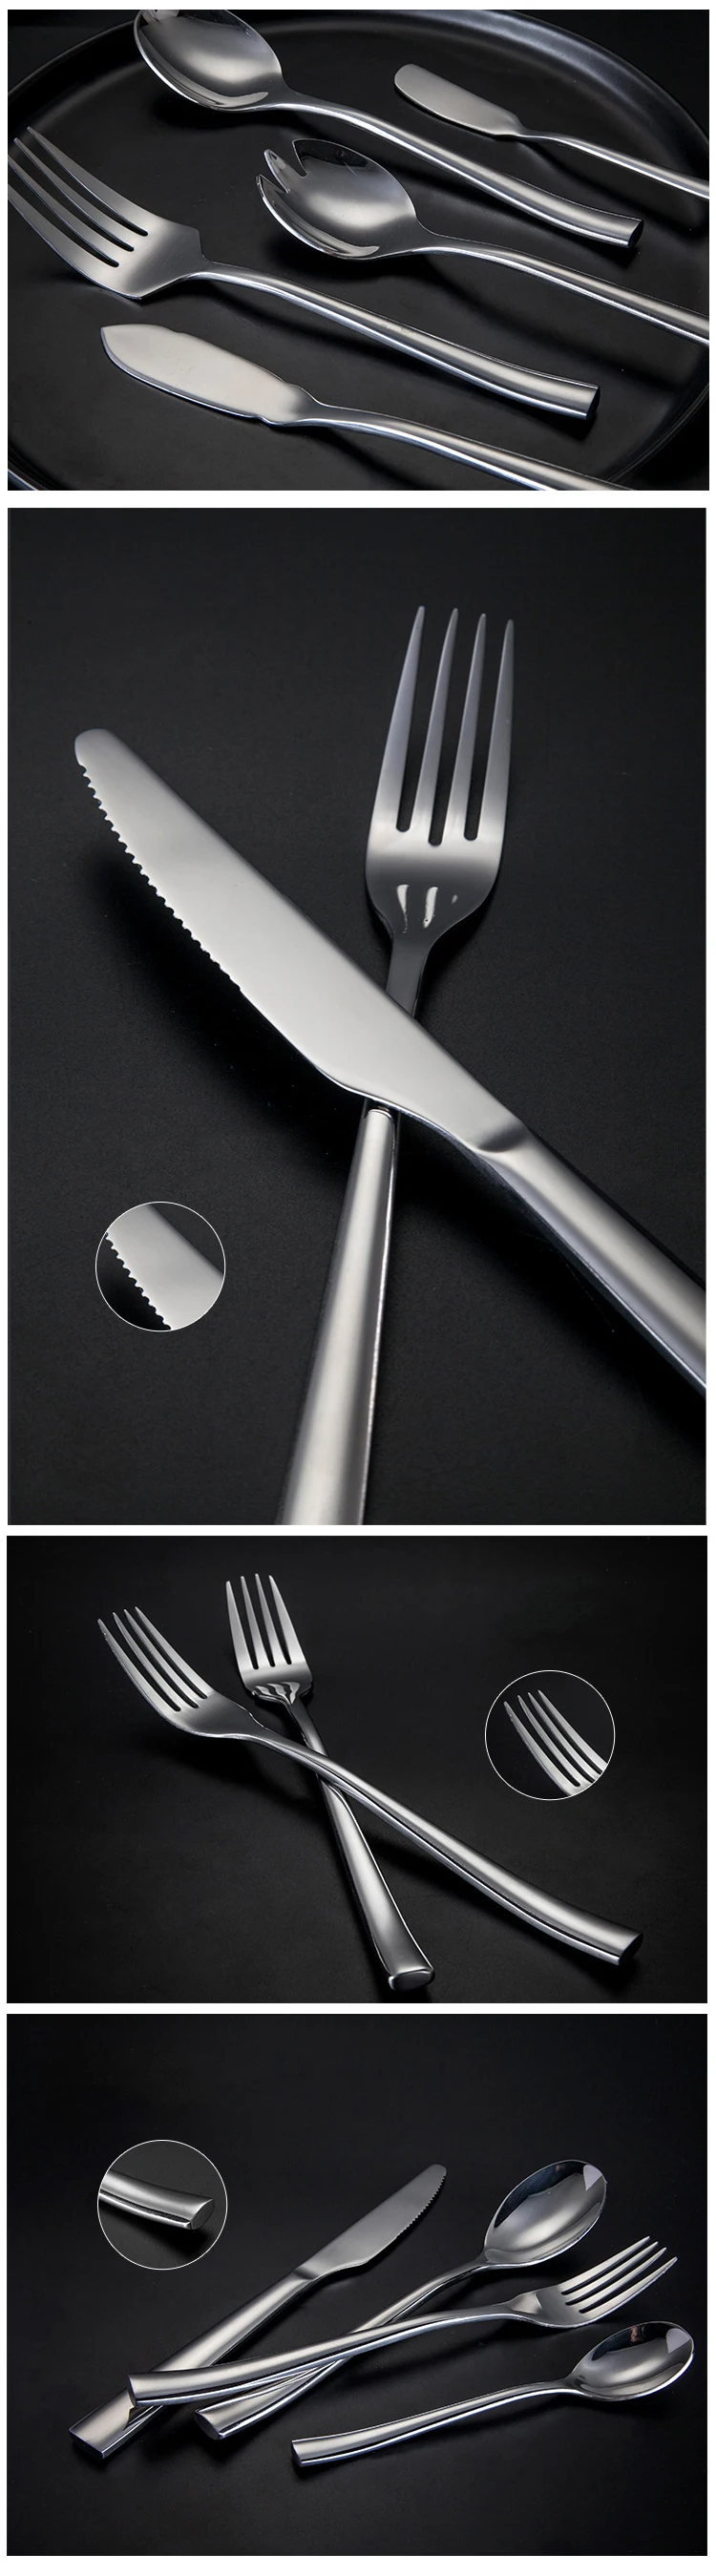 hot sale 430SS silver high polished knife spoon and fork set stainless steel silverware flatware cutlery for restaurant wedding